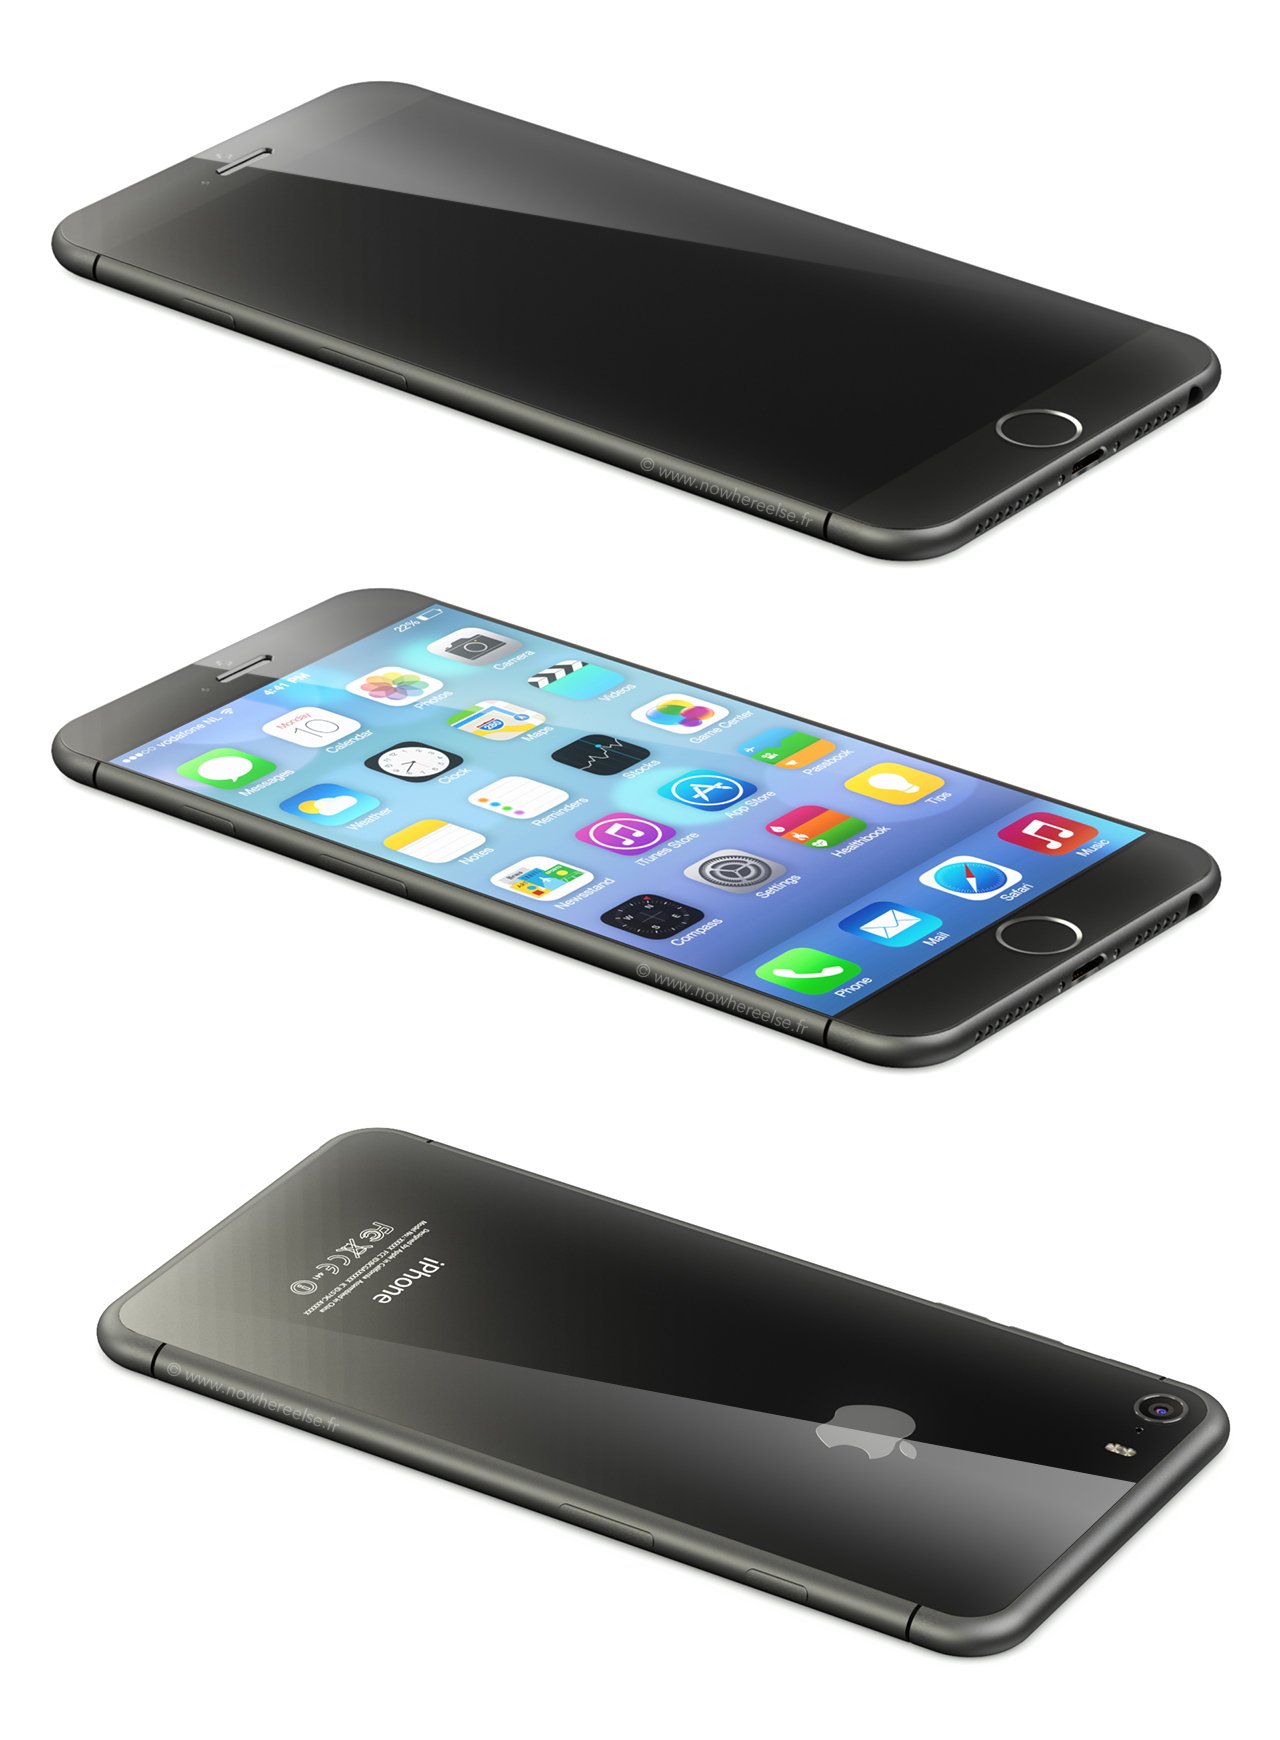 A new iPhone 6 concept based on leaks uses a Sapphire back.